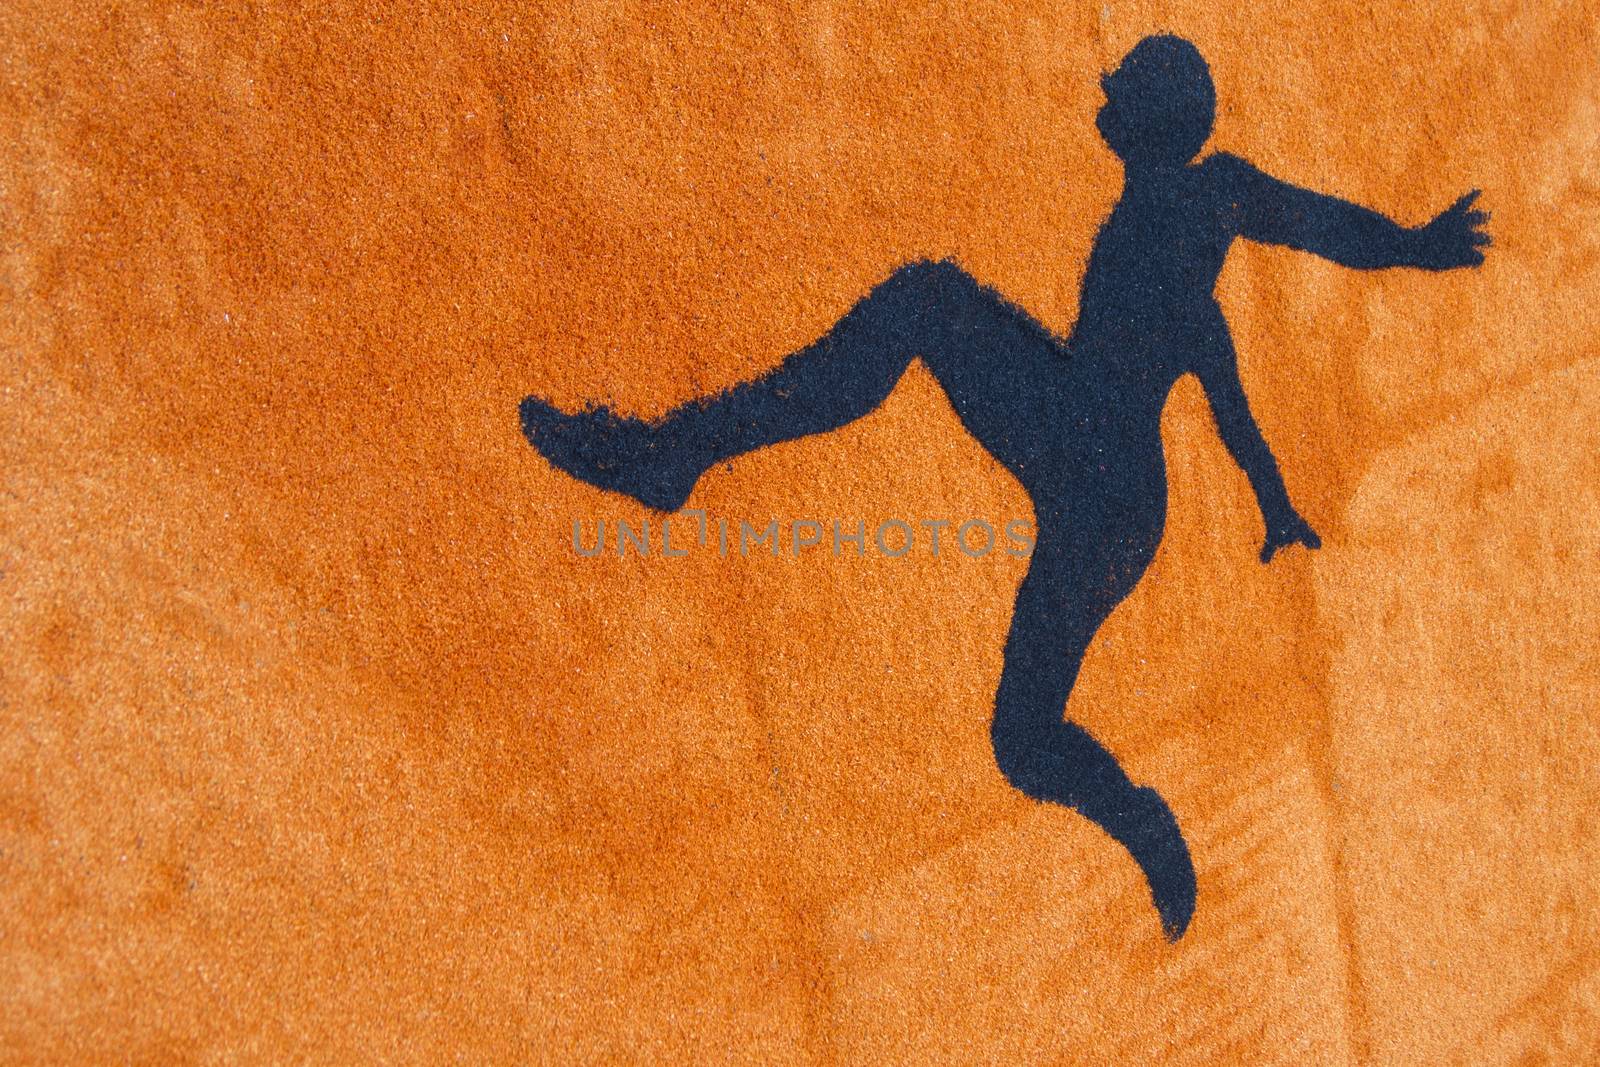 Stylized representation of a man in the moment of a jump